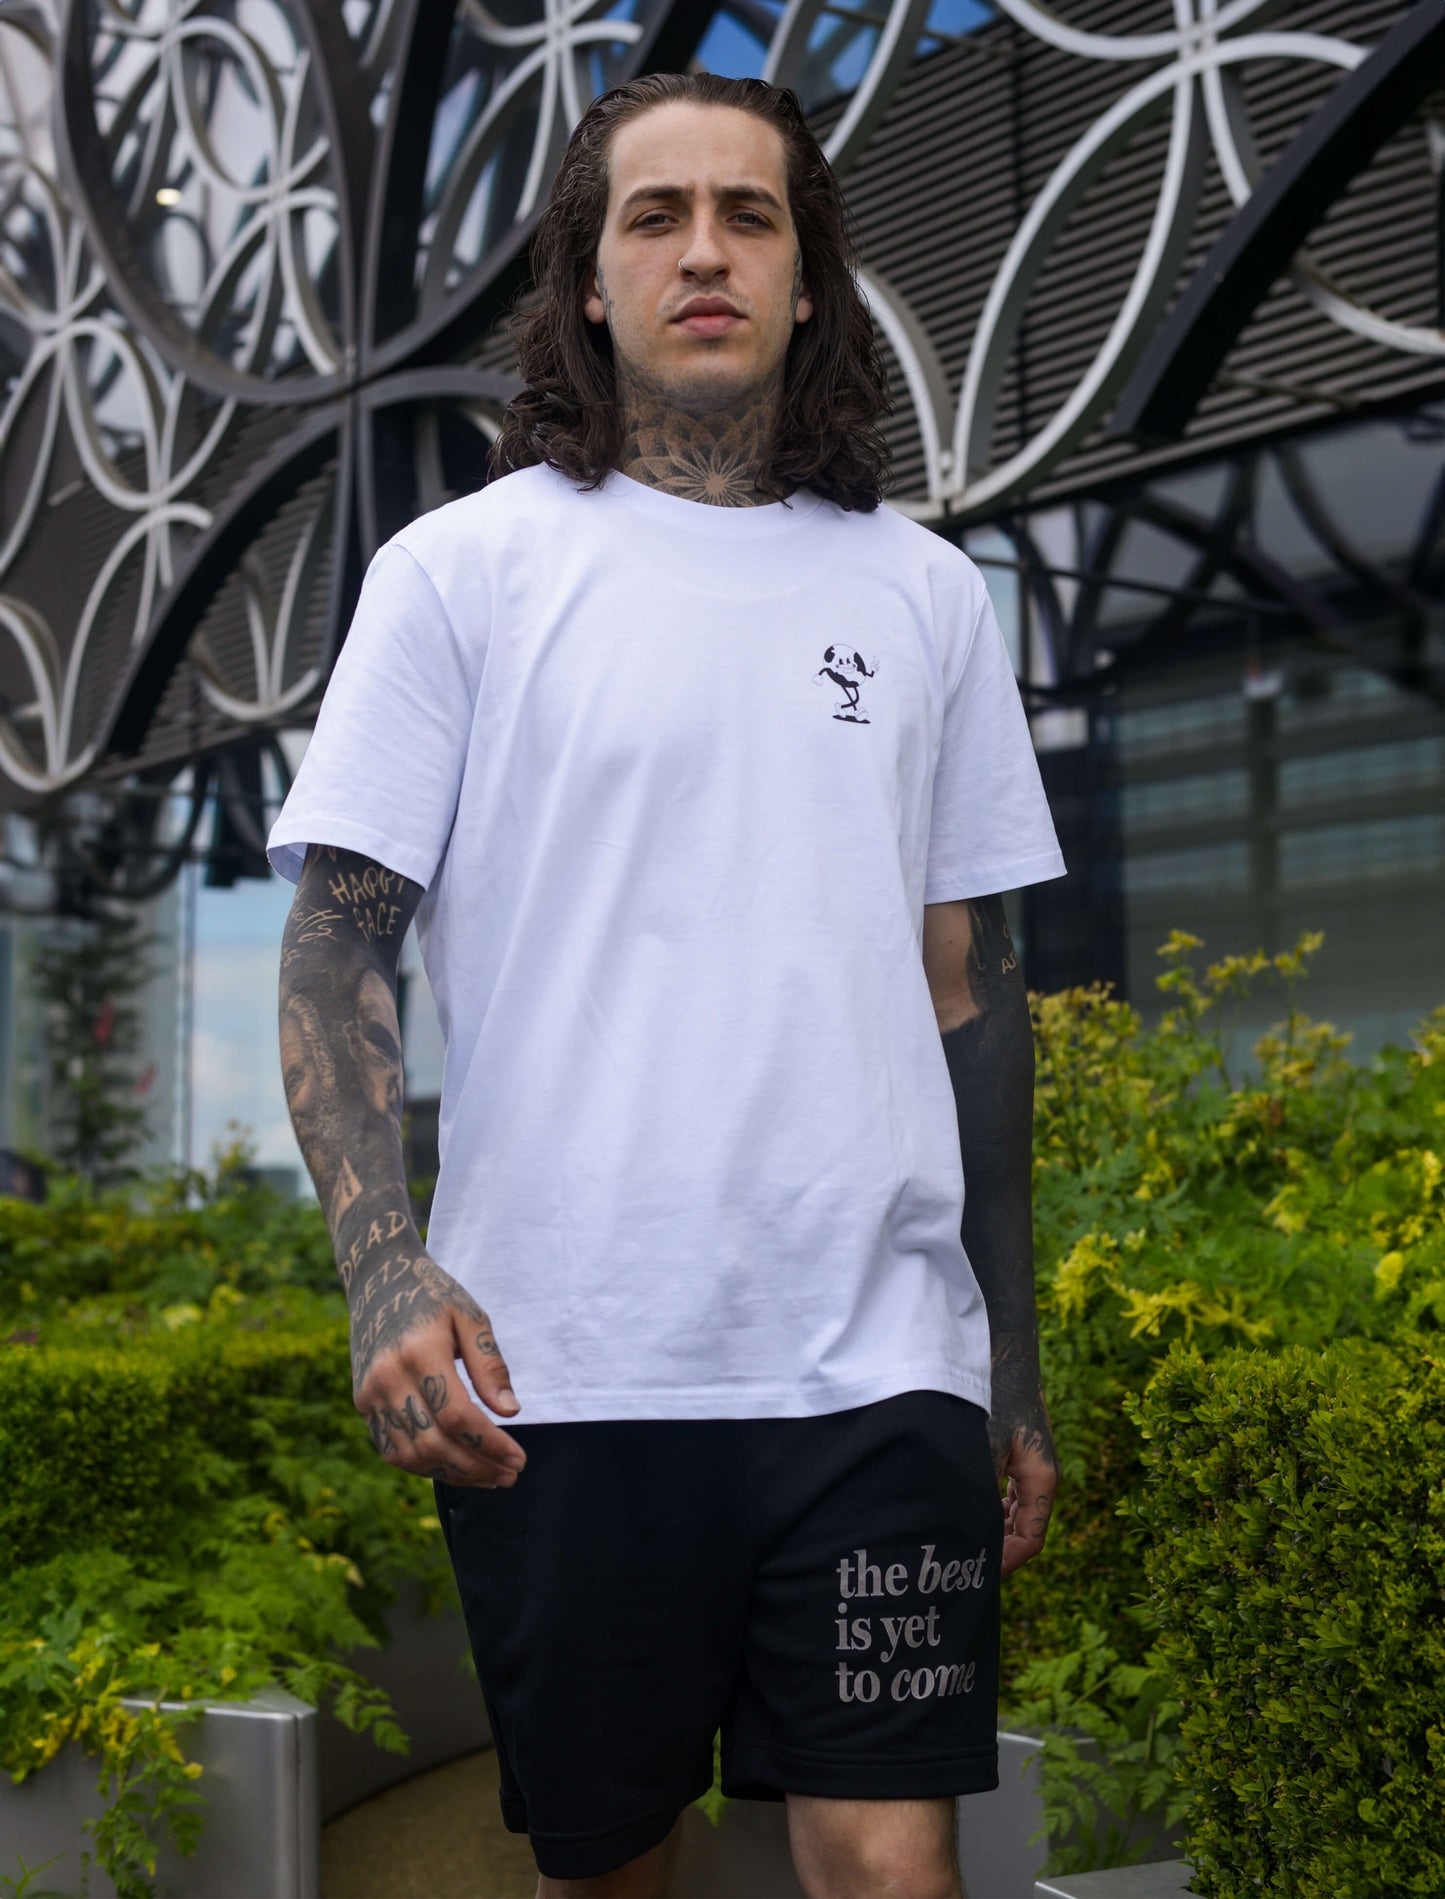 Trust in the universe tee, positive t-shirt, affirmation clothing, streetwear, unisex clothing. Man with tattoos, black and white, retro mascot 